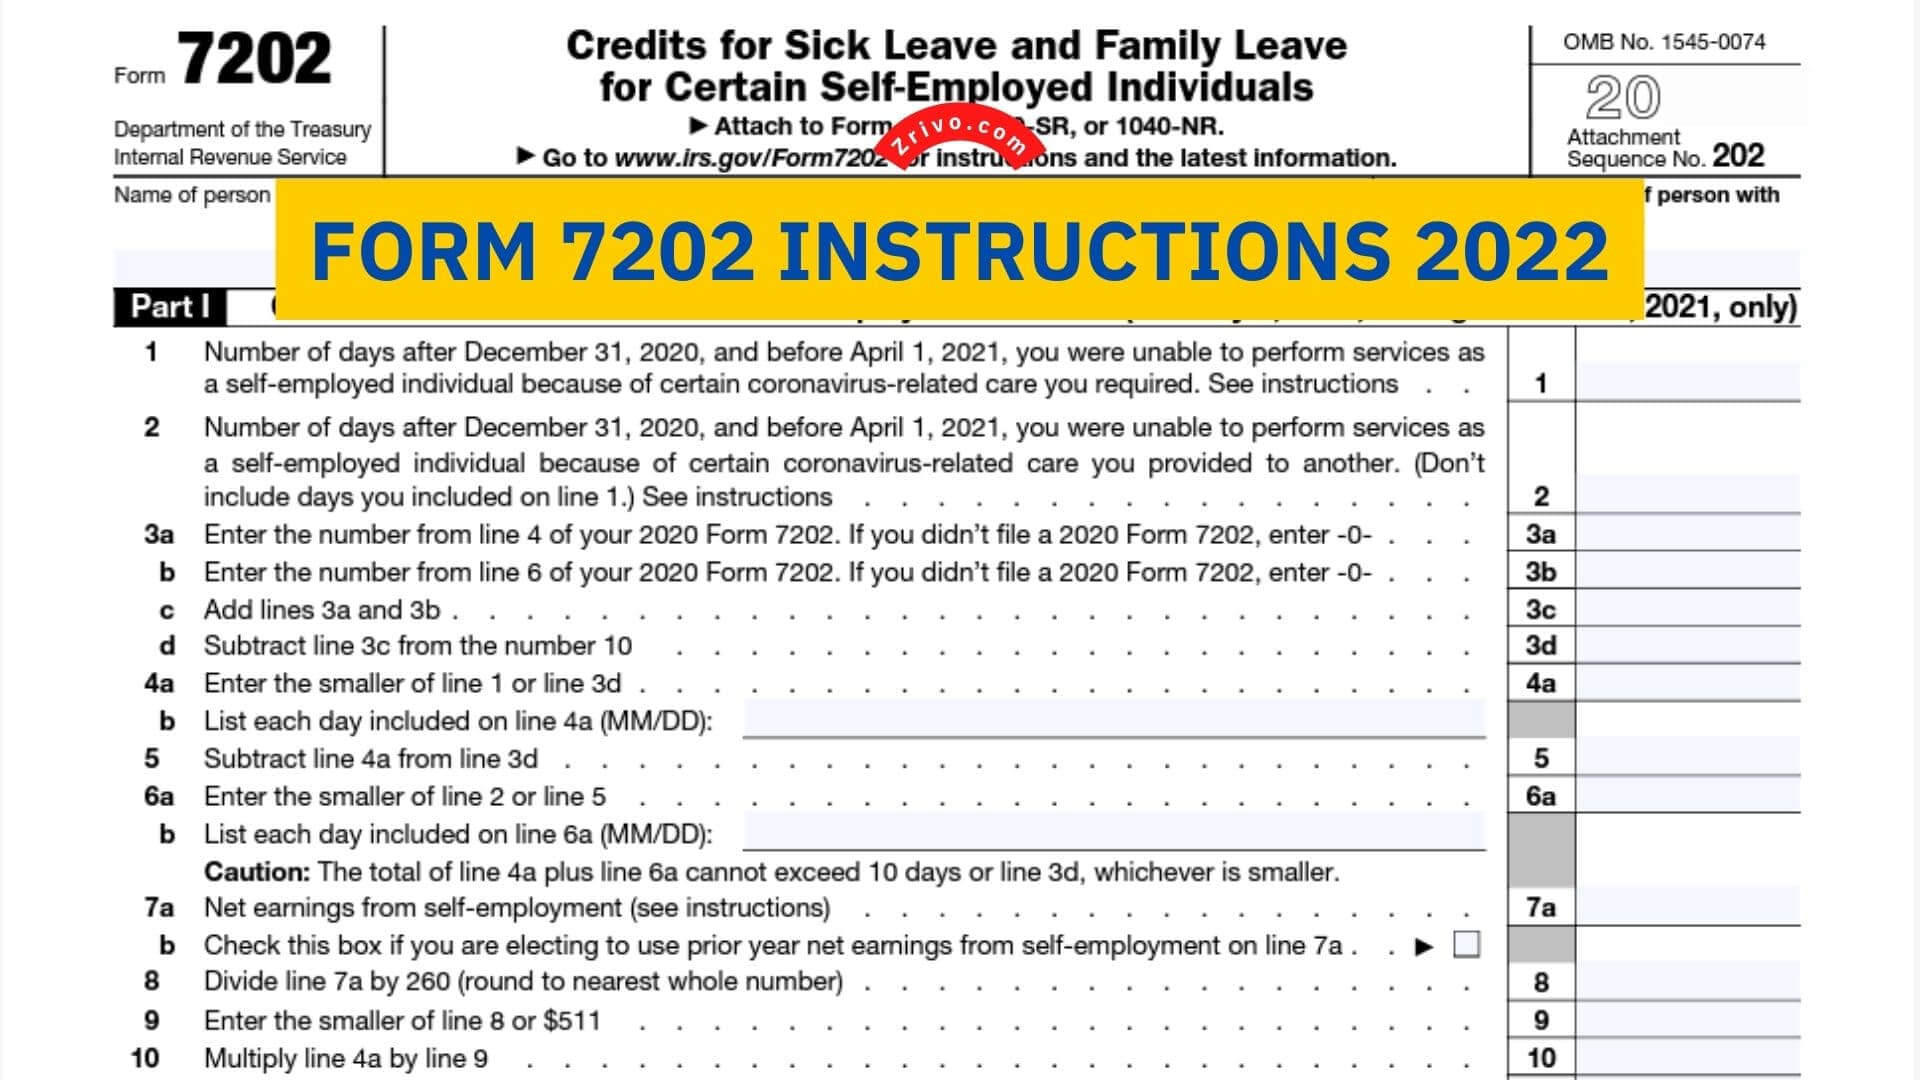 Form 7202 Instructions